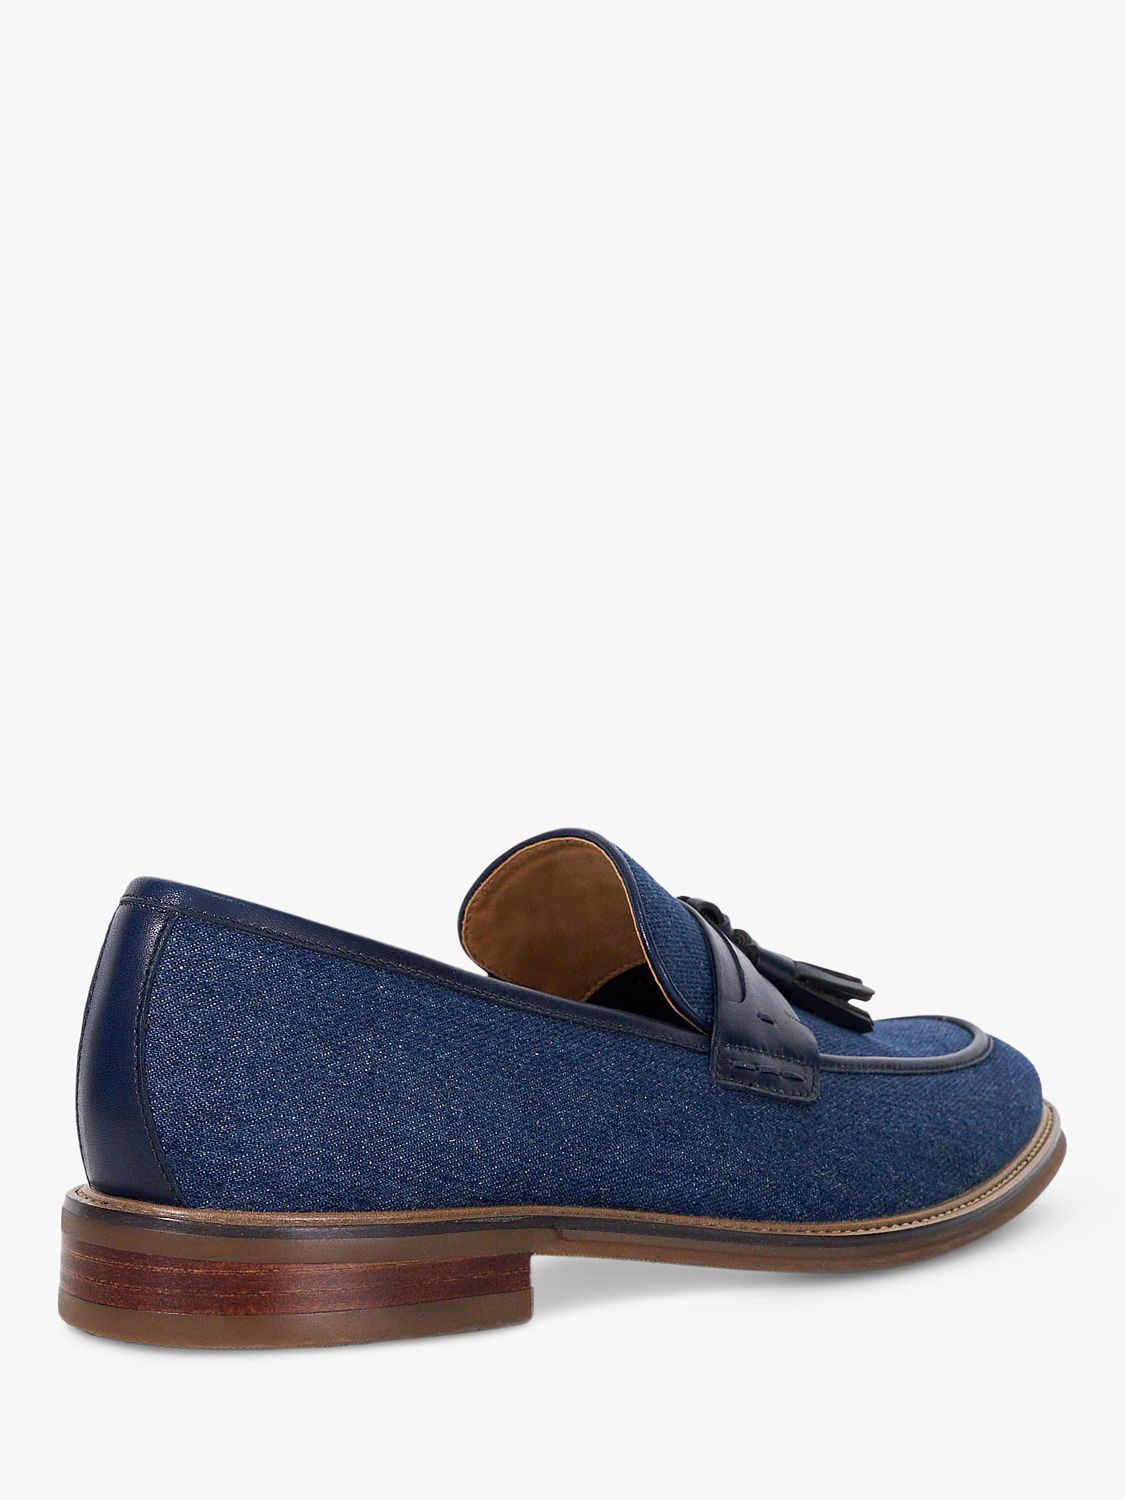 Dune Sought Leather Loafers, Navy, 6